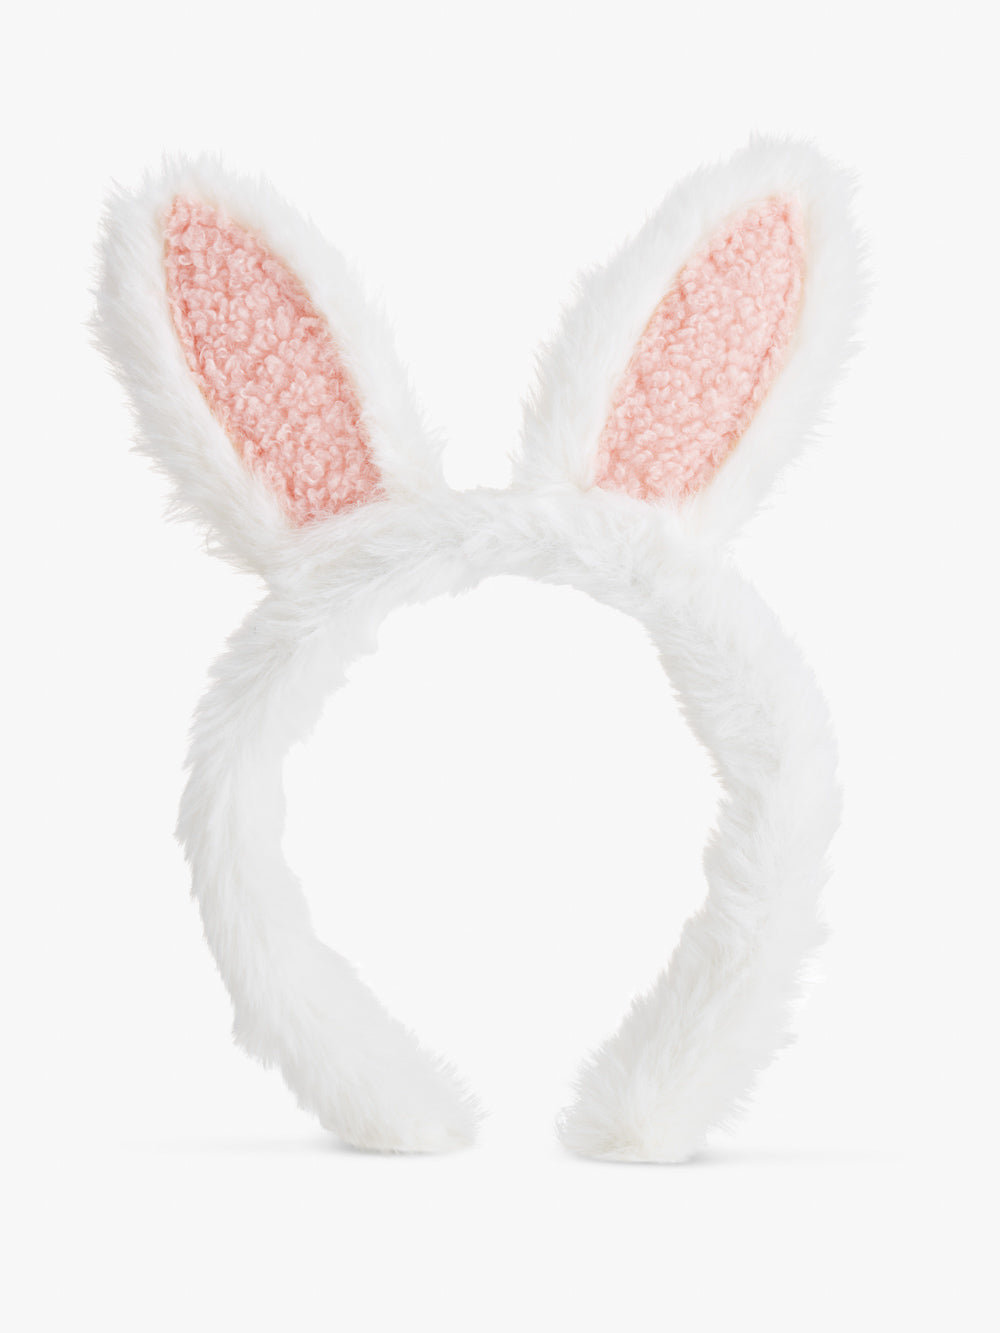 Small Stuff Accessories - Fluffy bunny ears for World Book Day